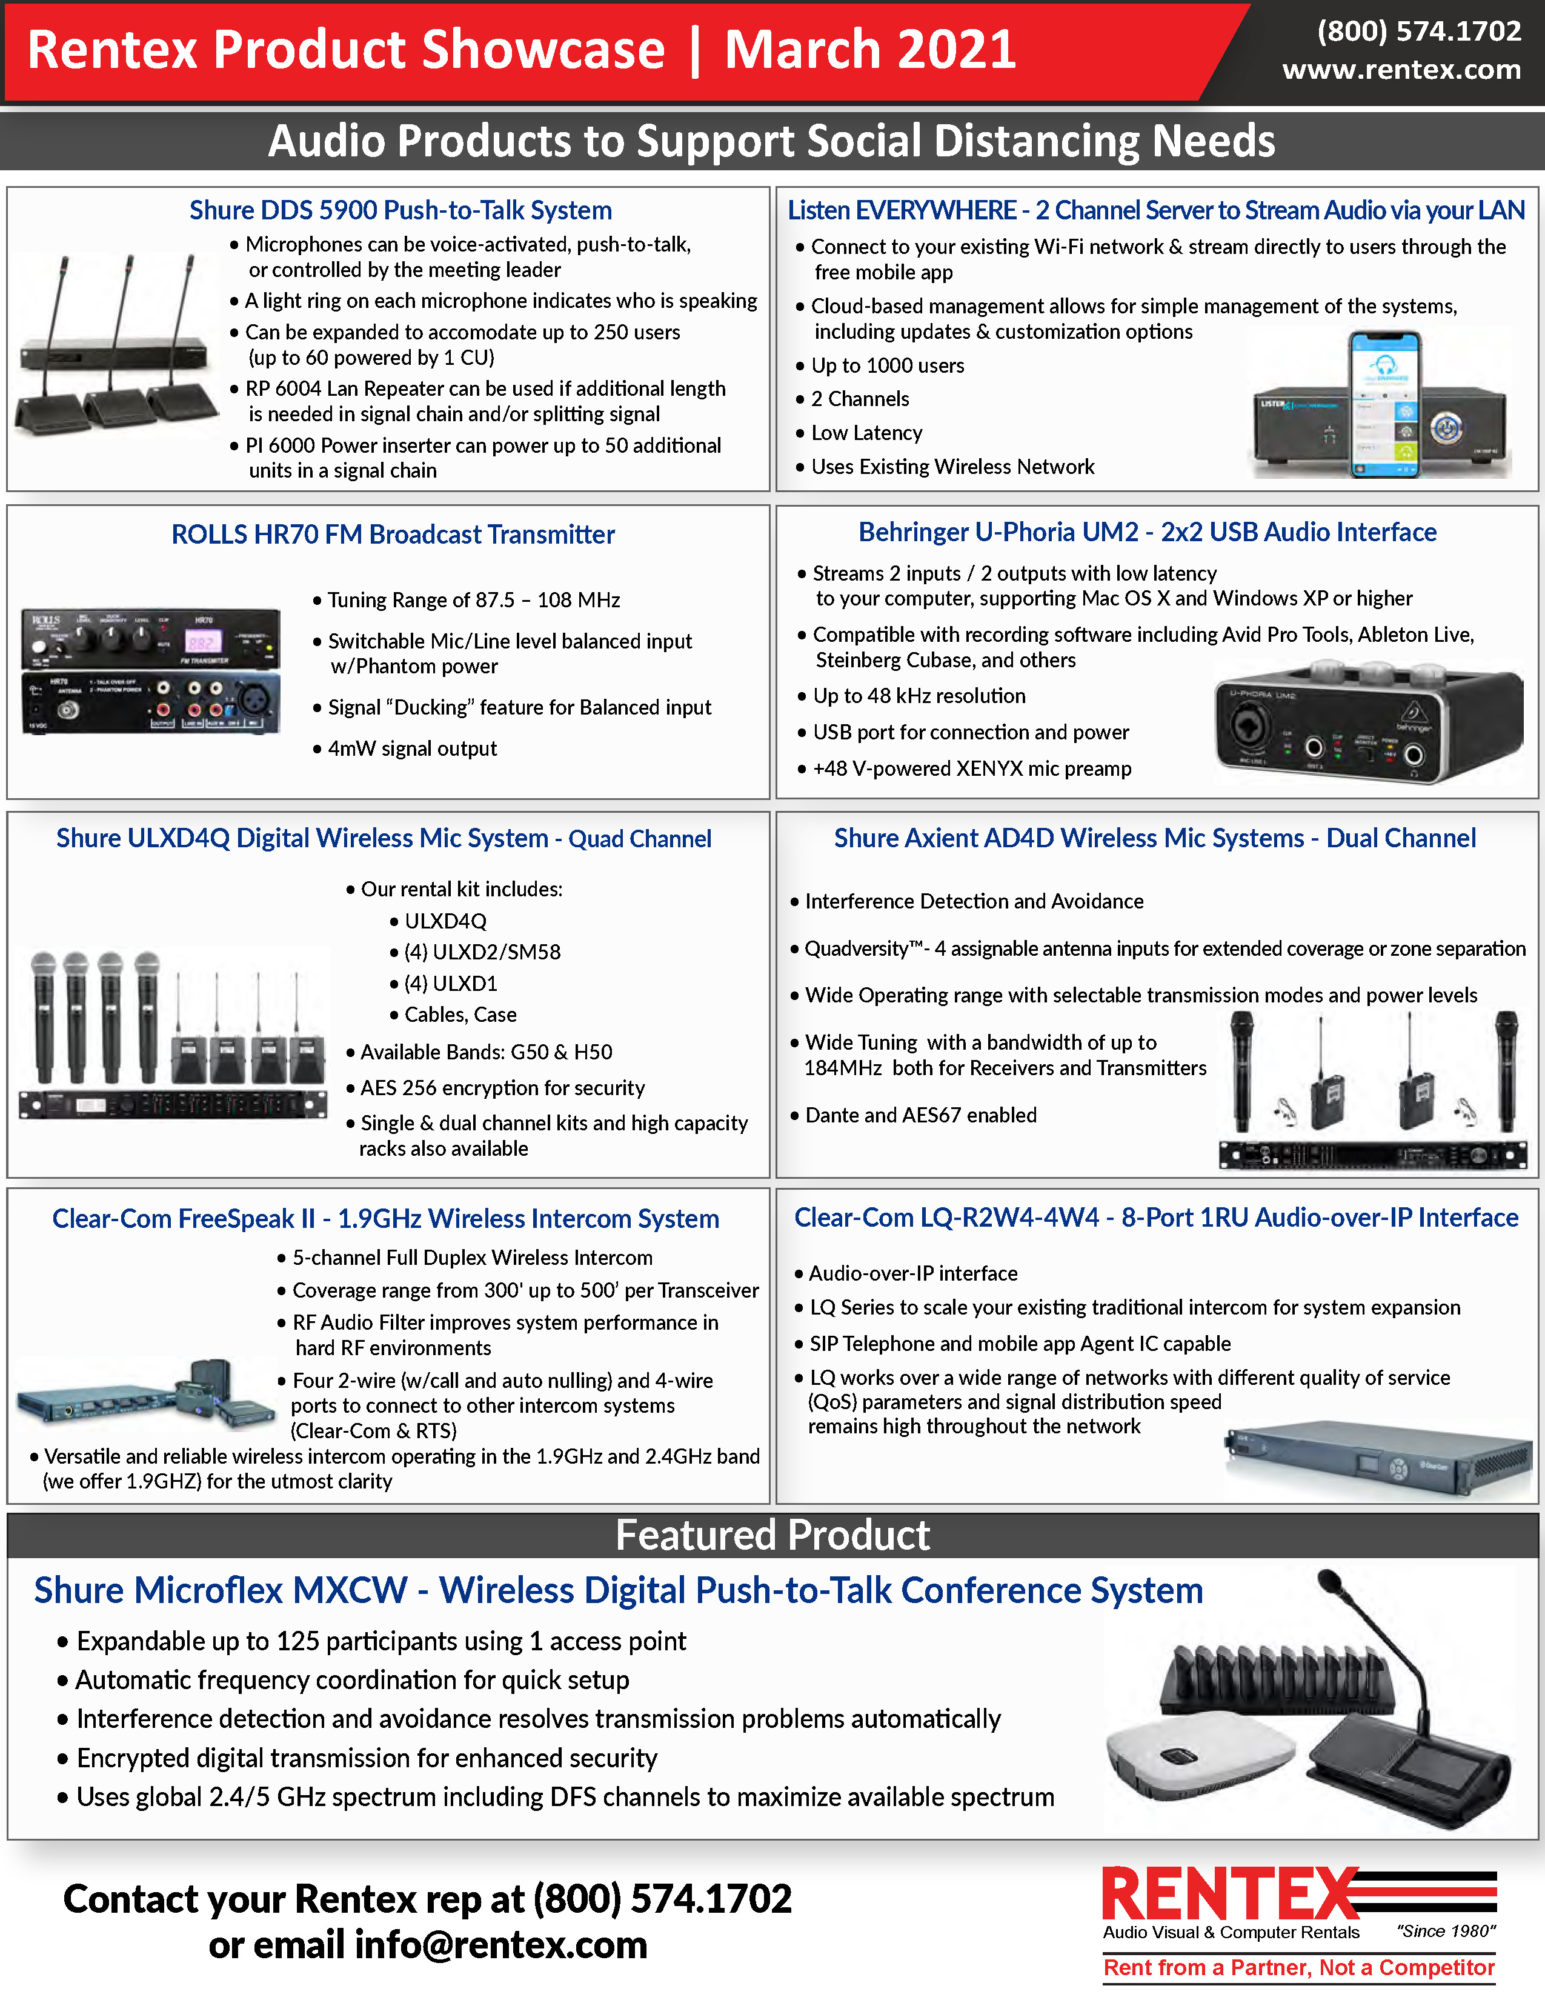 March Product Showcase from Rentex - Audio Products for Social Distancing Needs